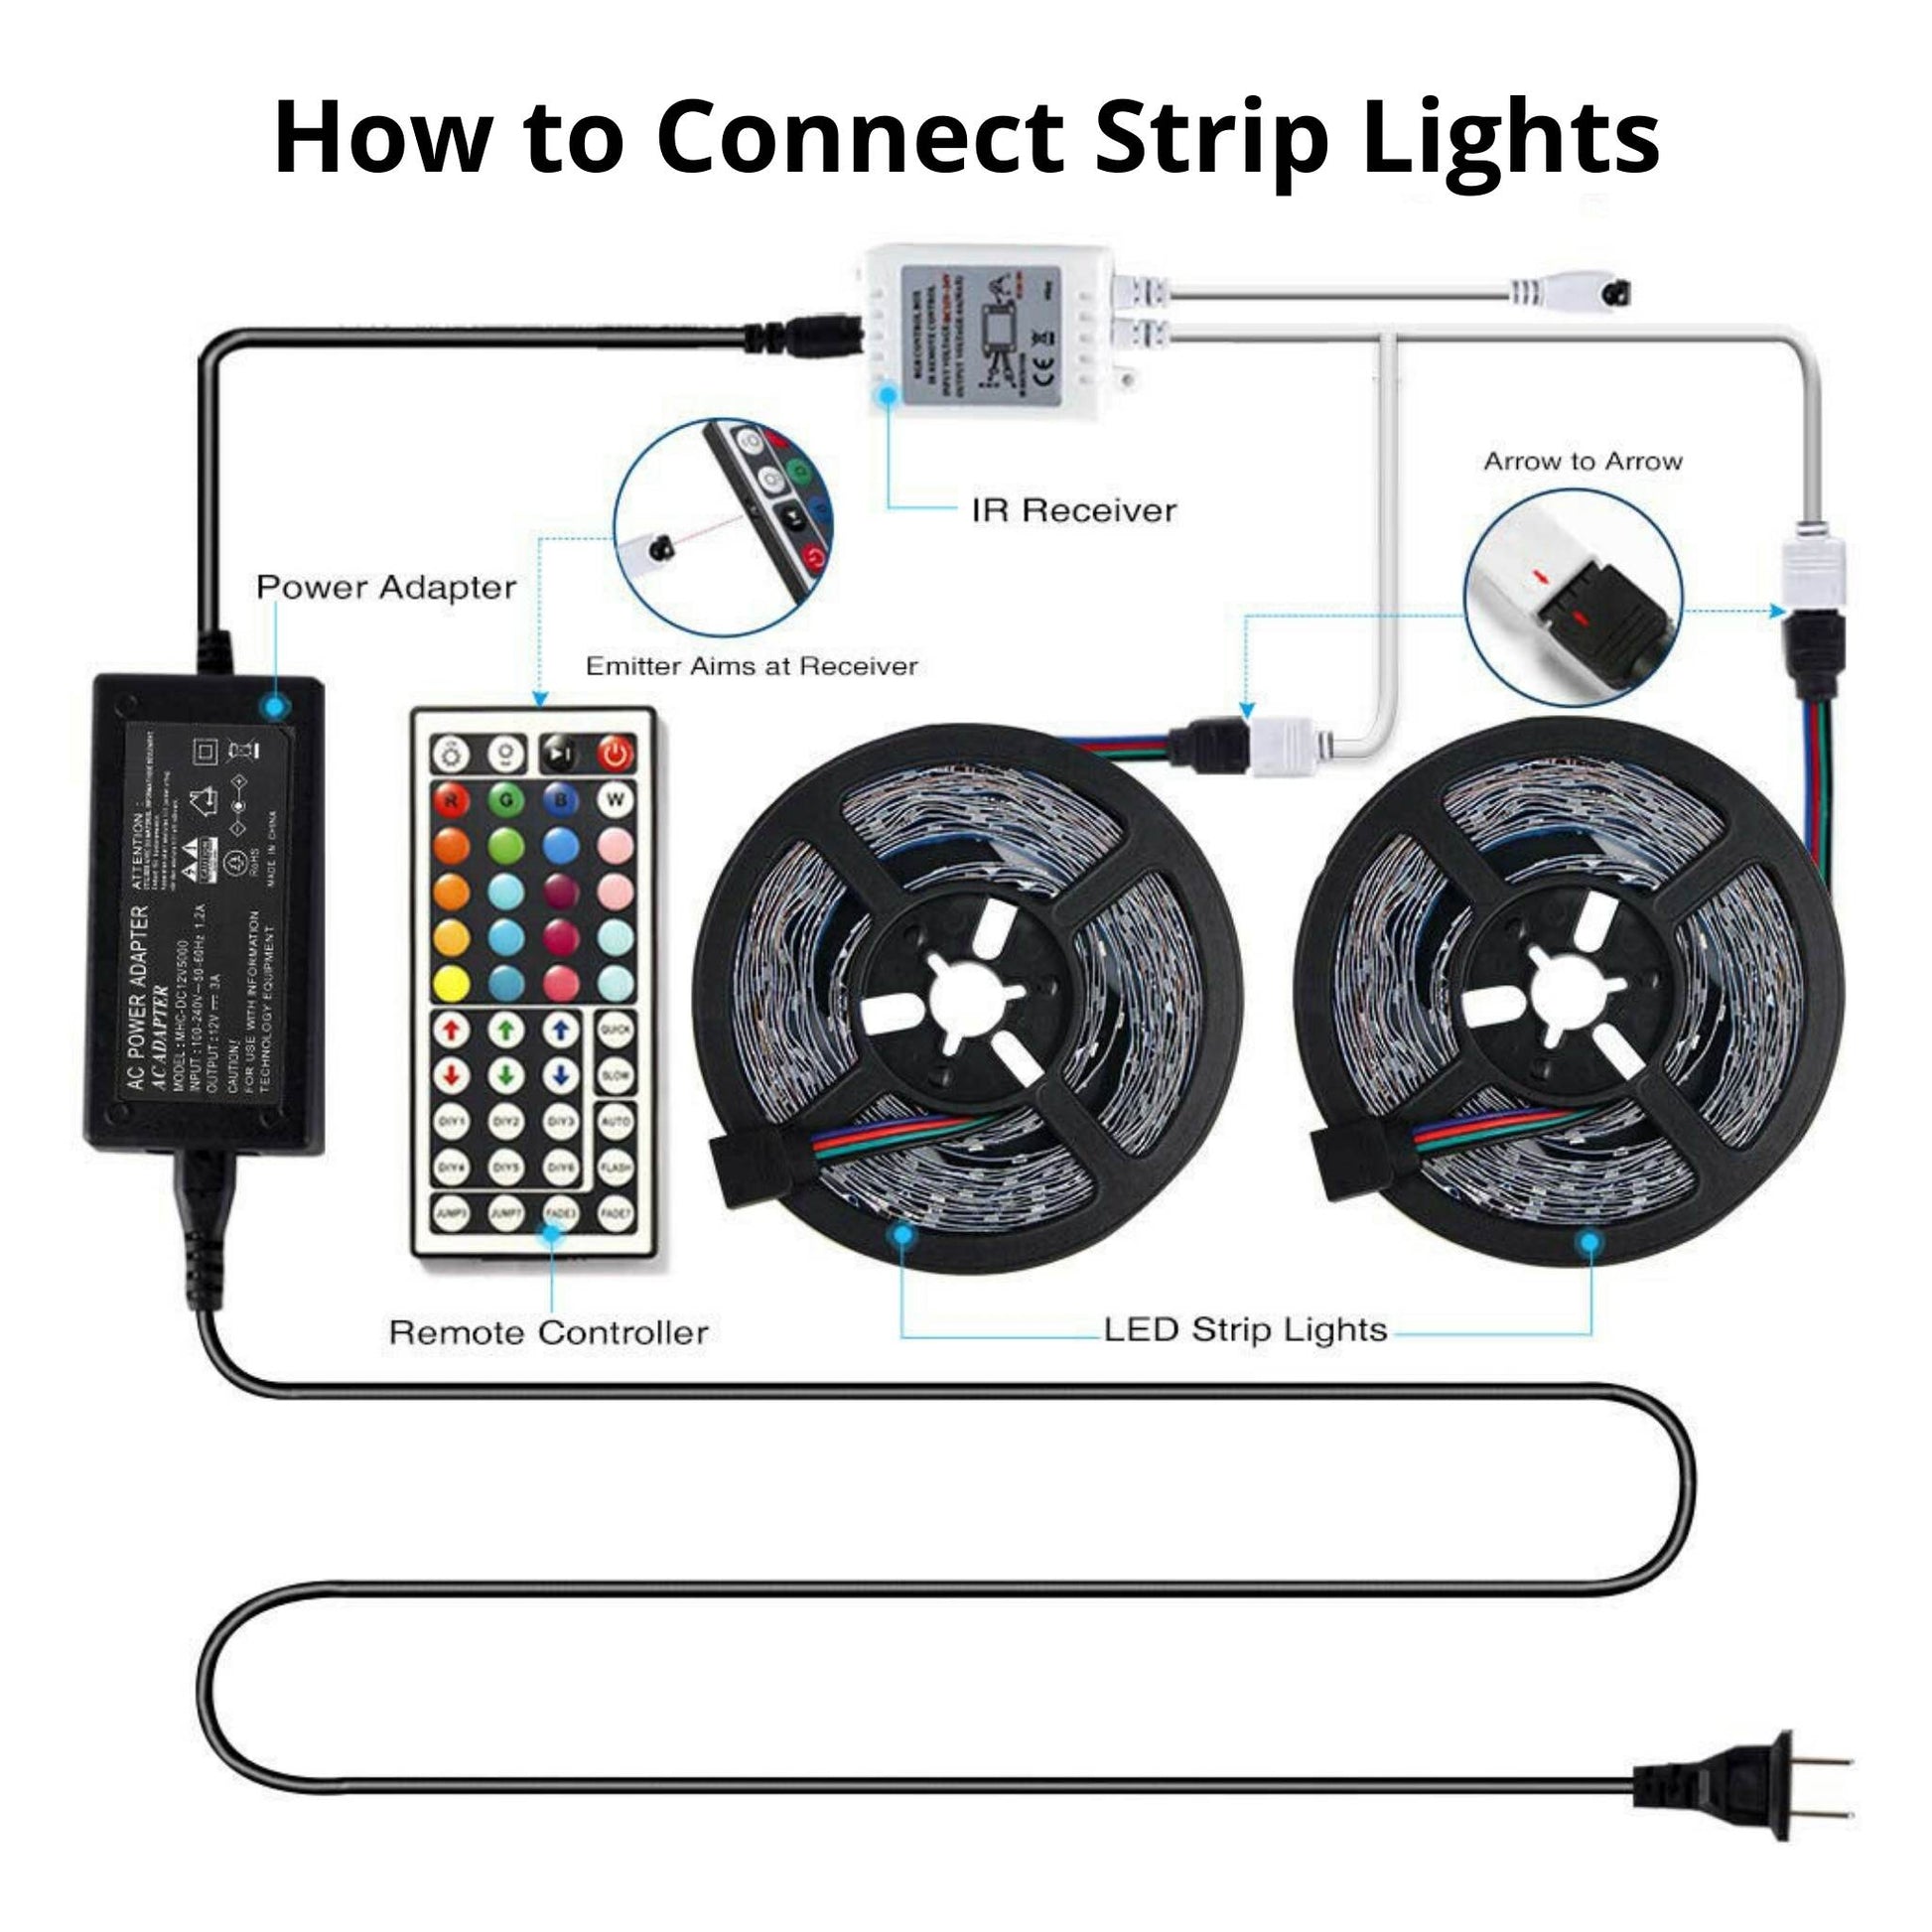 RGB Control Power Kit for AC Plug-in LED Strips